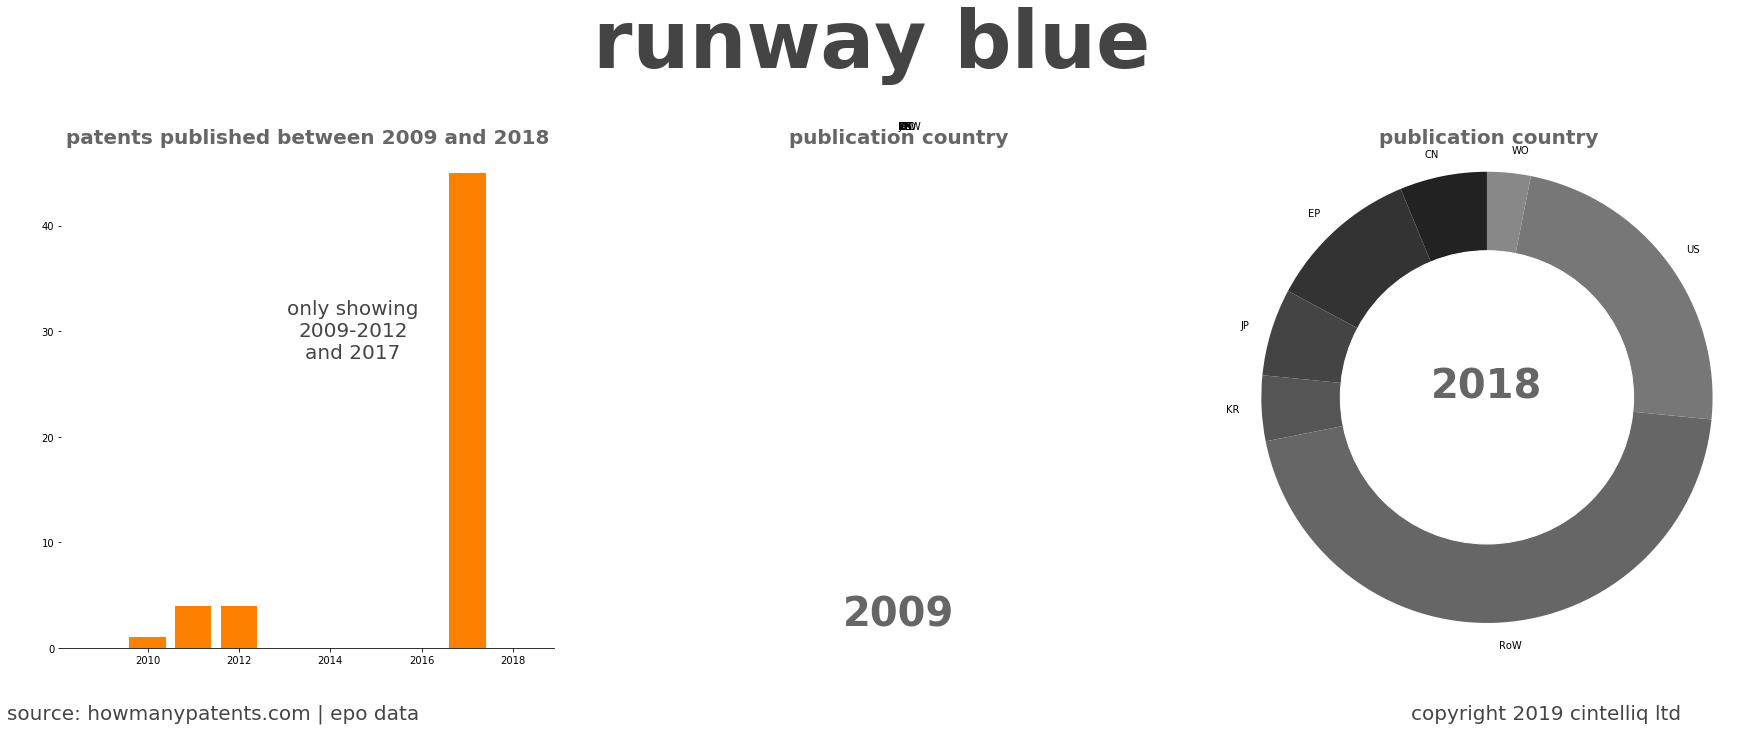 summary of patents for Runway Blue